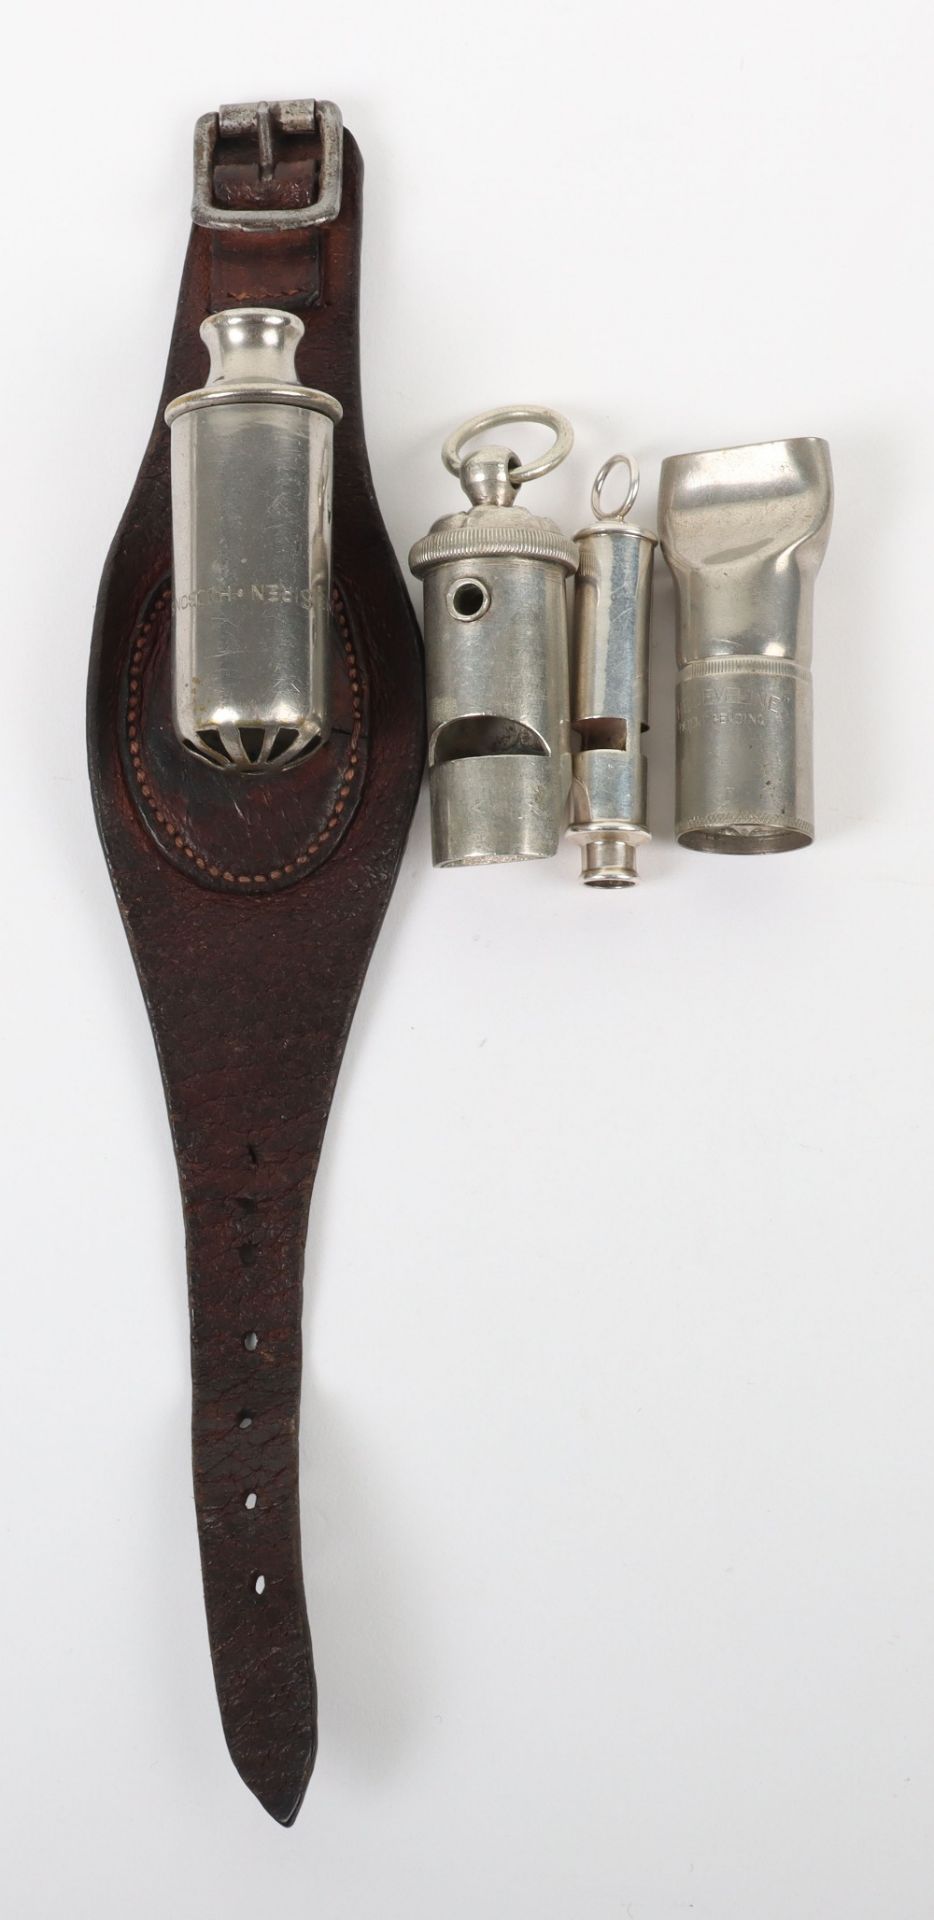 Unusual Grouping of Whistles